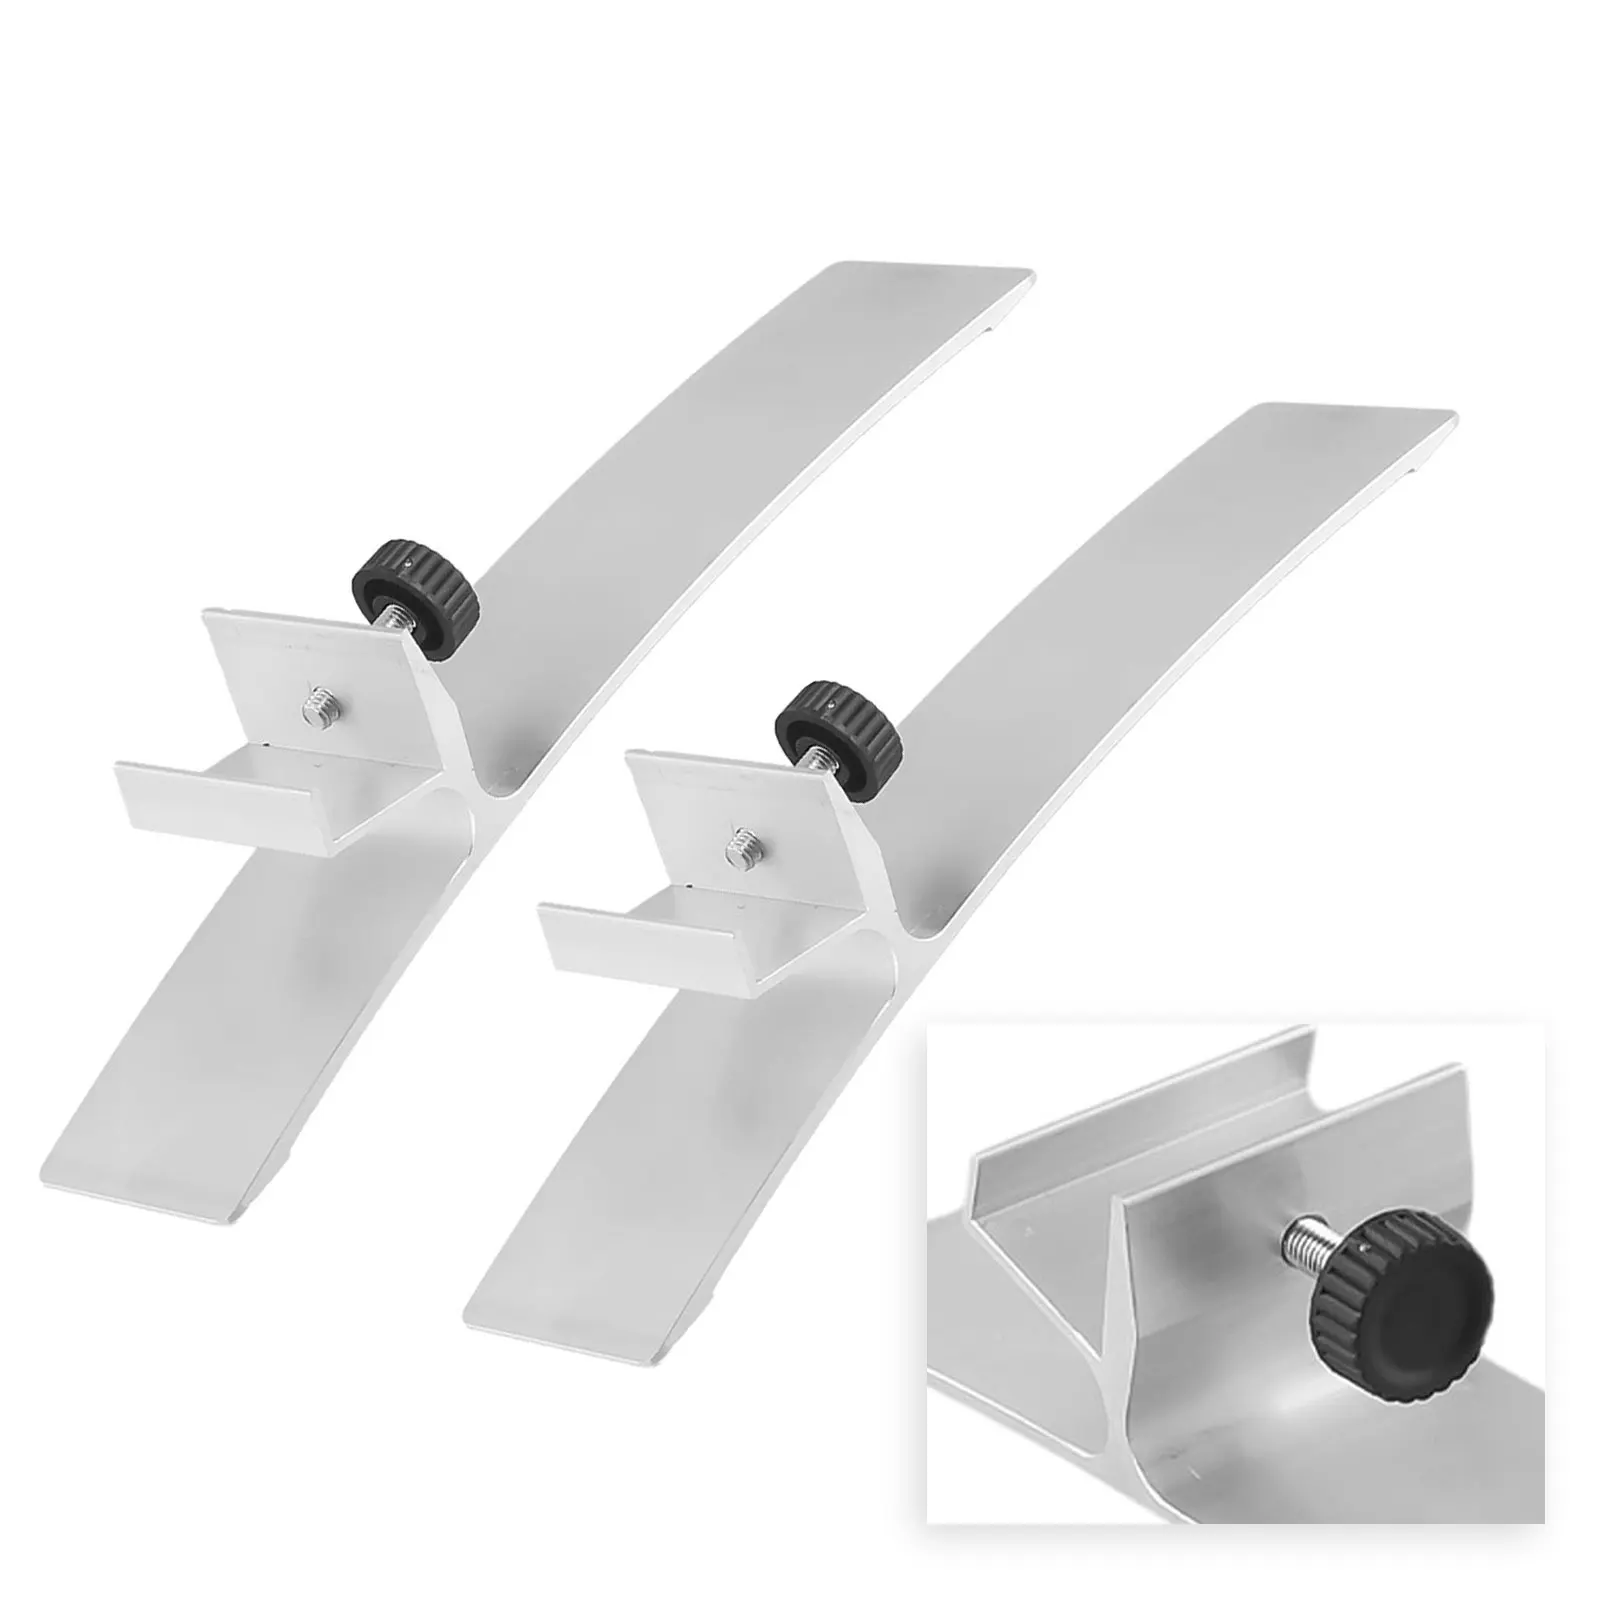 

Stands Bracket Base Set Bracket For Infrared Heating Panels Portable For All Heating Plates With A Frame Of 16-22mm